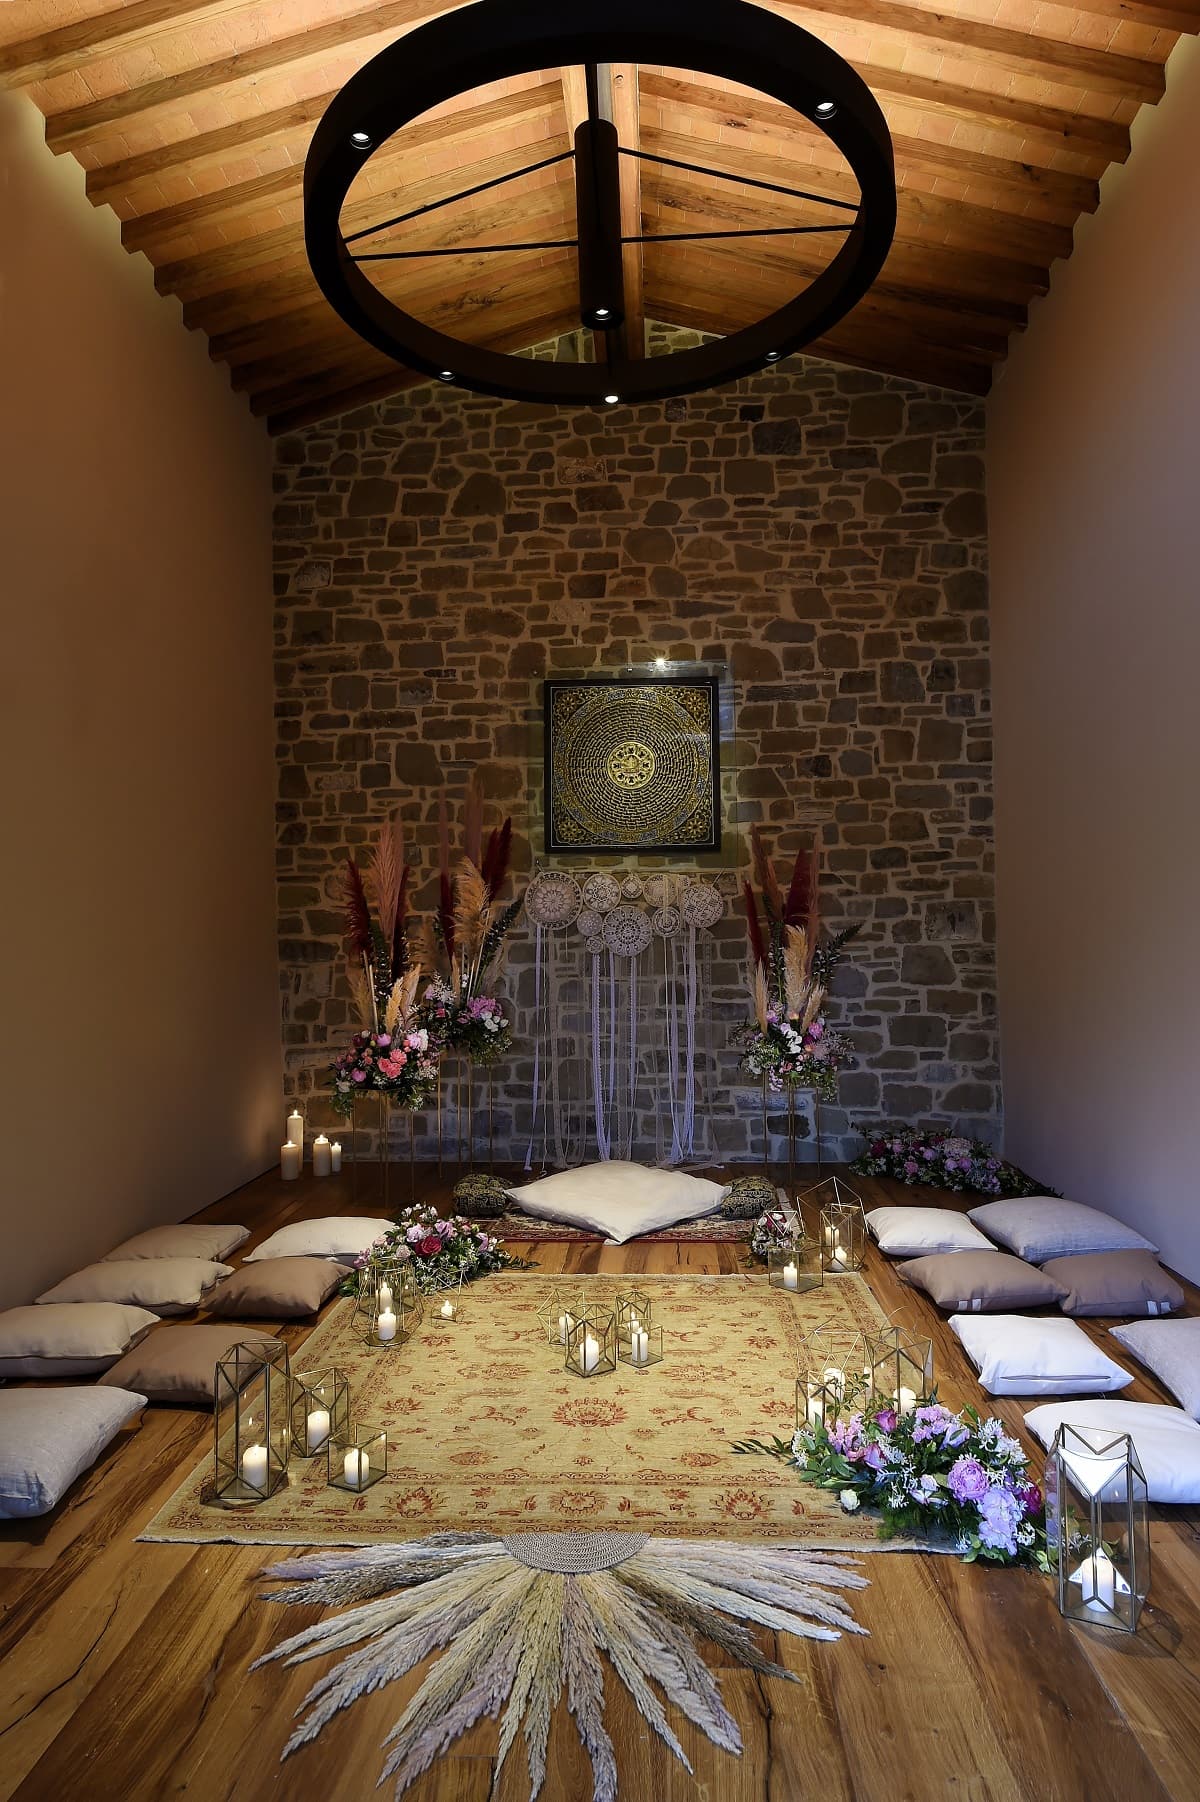 Tenuta di Carleone Wedding Venue in Tuscany Italy - The Luxury Elopement | Valued Member Weddings Abroad Guide Supplier Directory